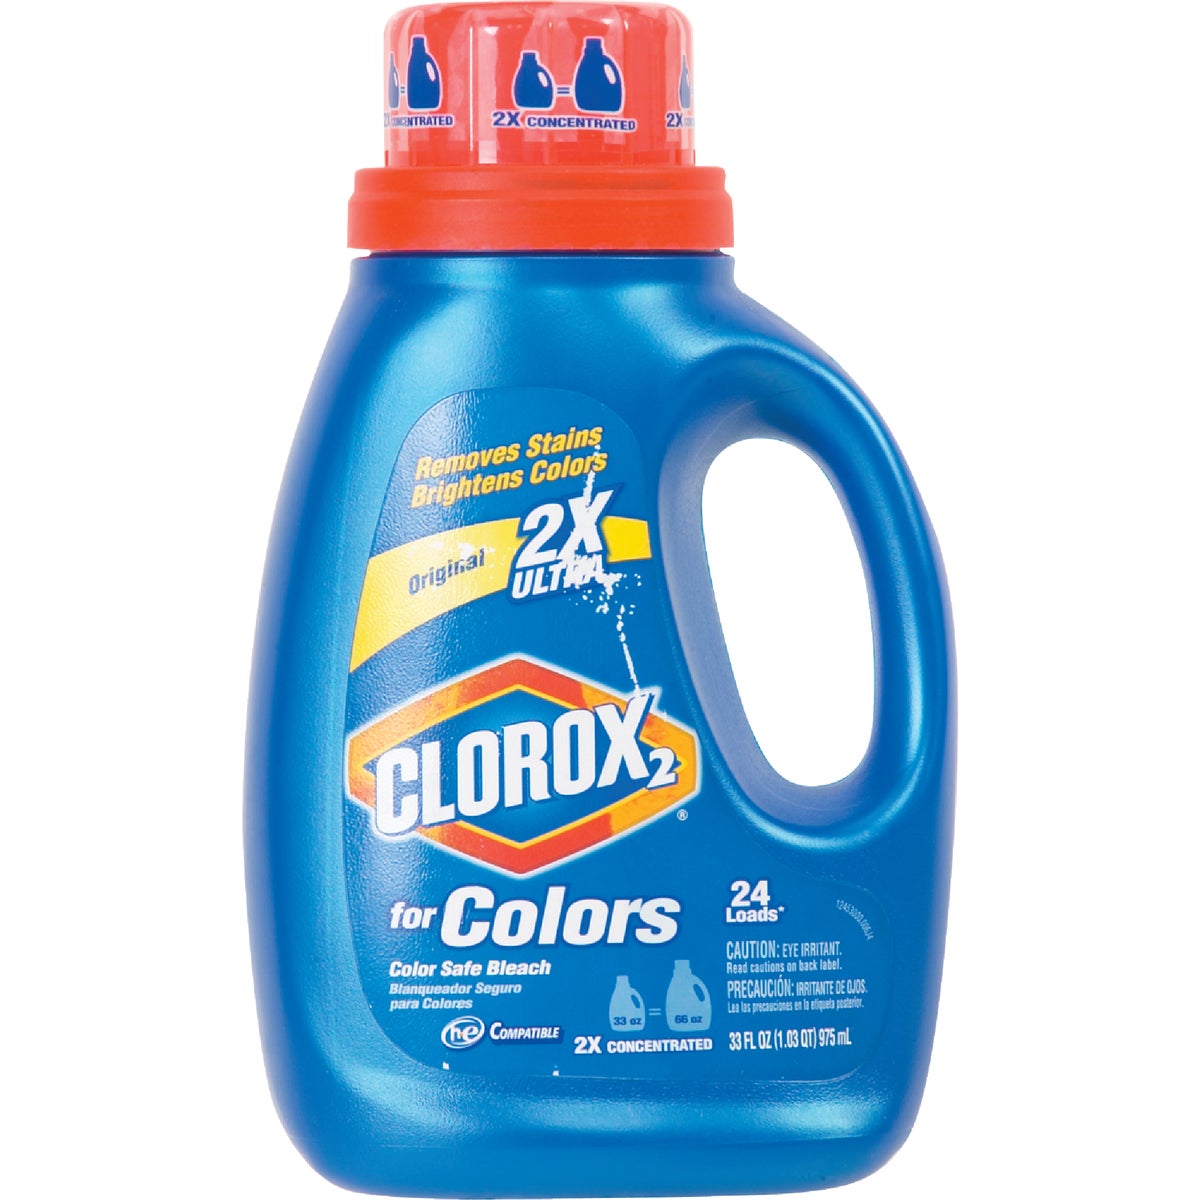 Item 619248, Clorox 2X product uses the power of oxygen to safely remove stains and 